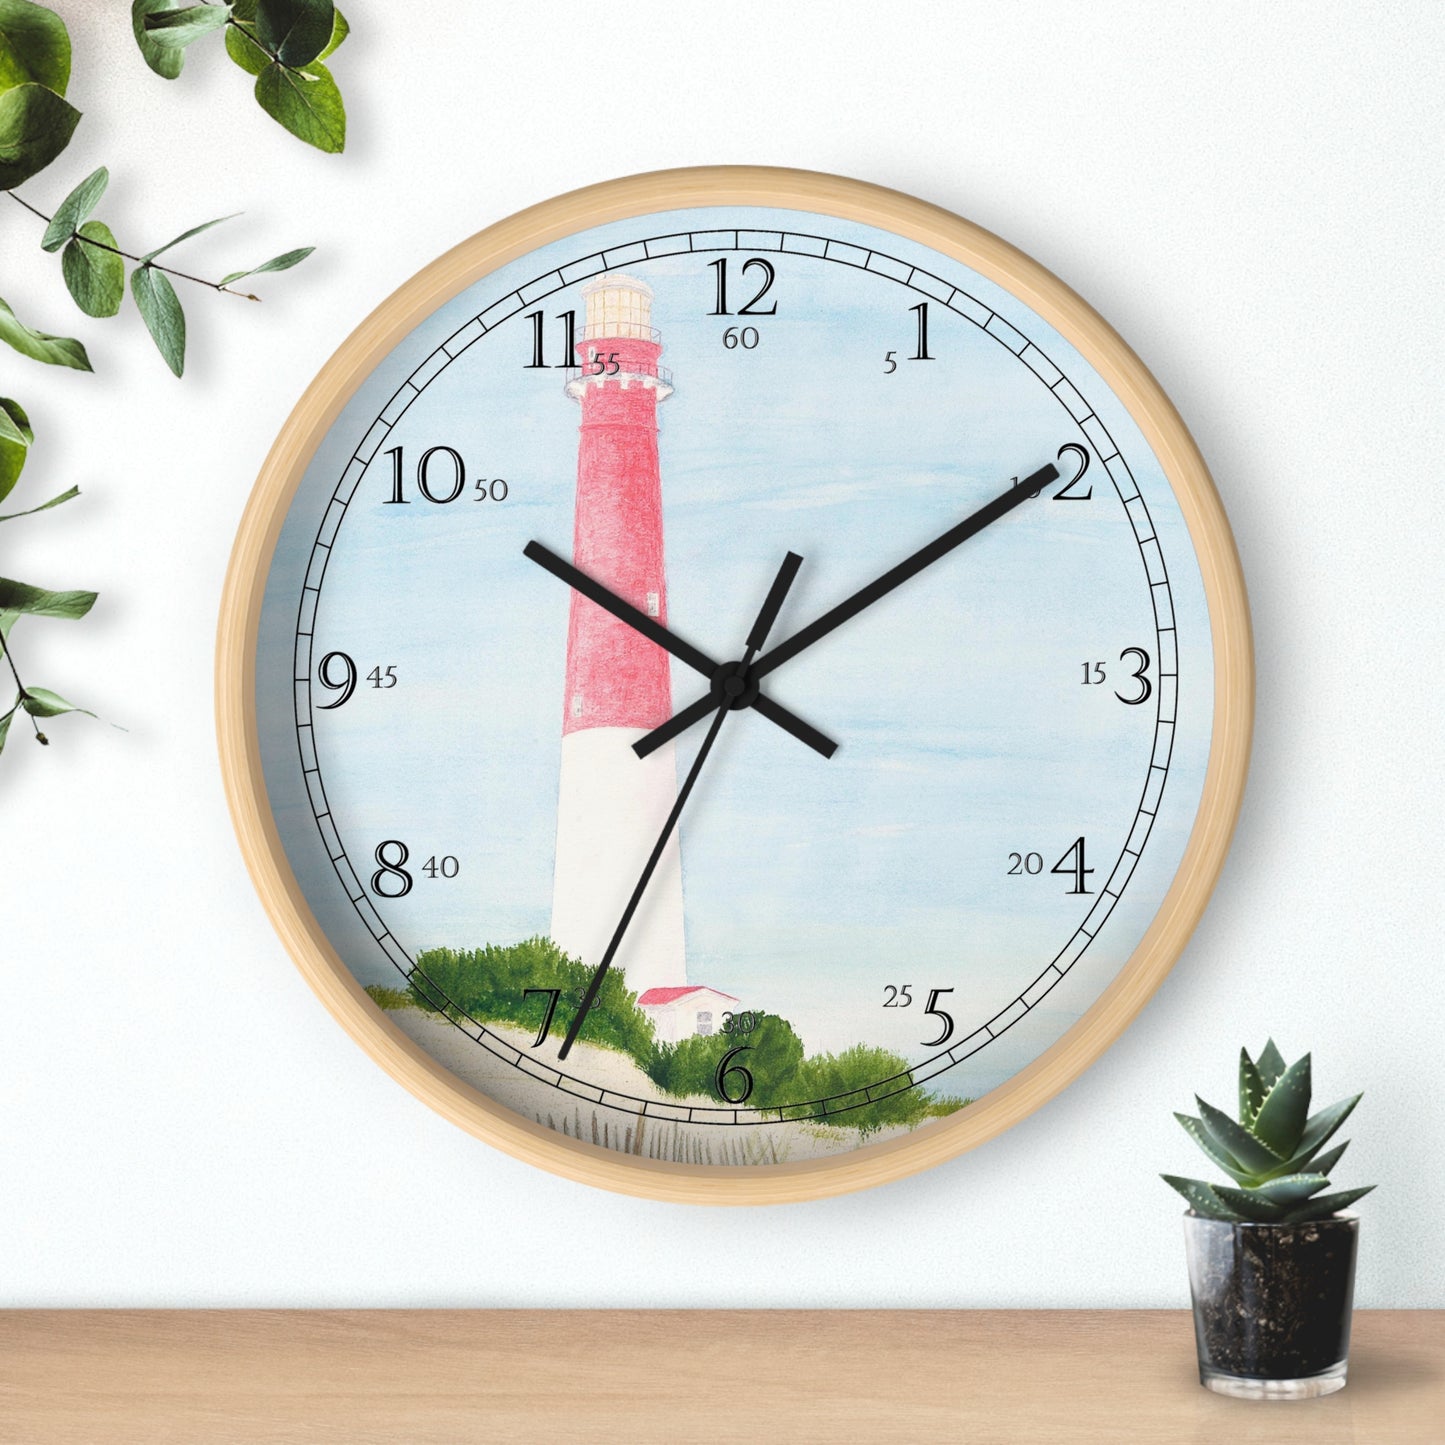 The Barnegat Lighthouse English Numeral Clock will add nautical touch to any room.